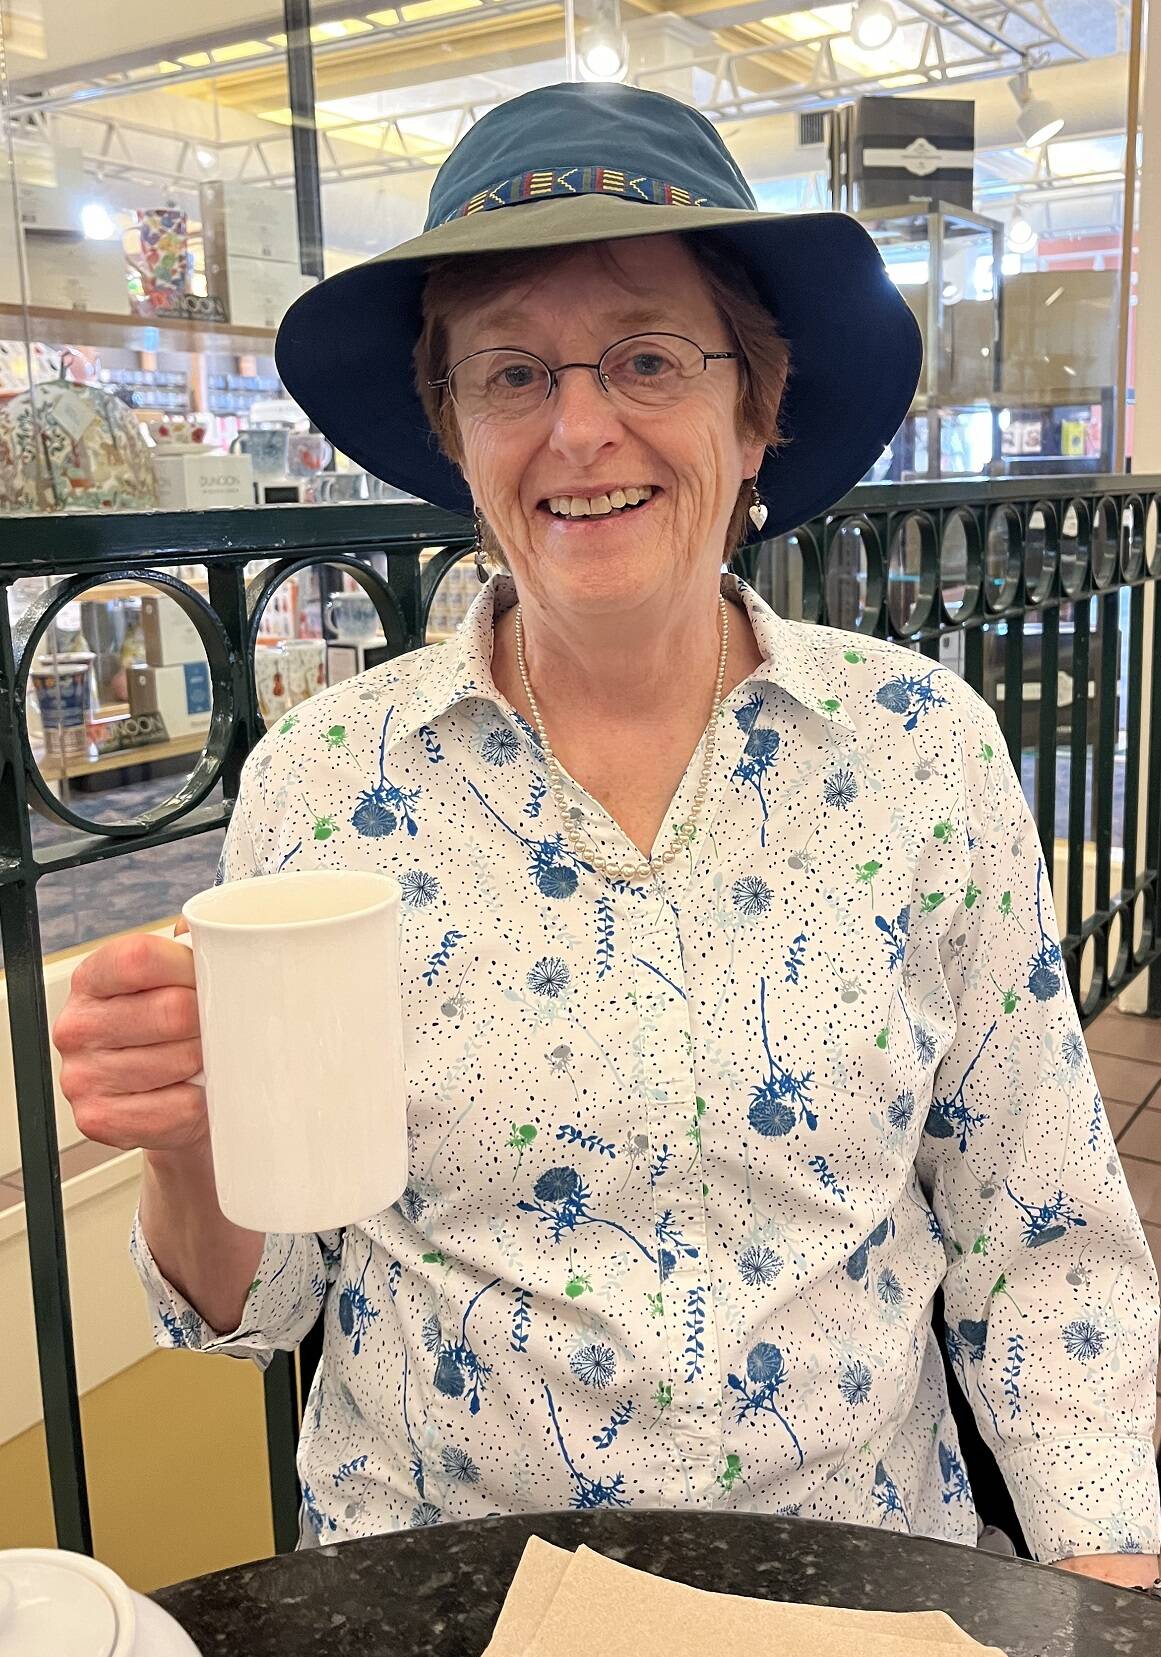 Get to know your morning joe! Join Clallam County Master Gardener Margery Whites for the Green Thumb Education Series presentation “A History of Coffee,” Thursday, July 27 th from noon – 1 p.m. at the Port Angeles Library. (Photo by Margery Whites).